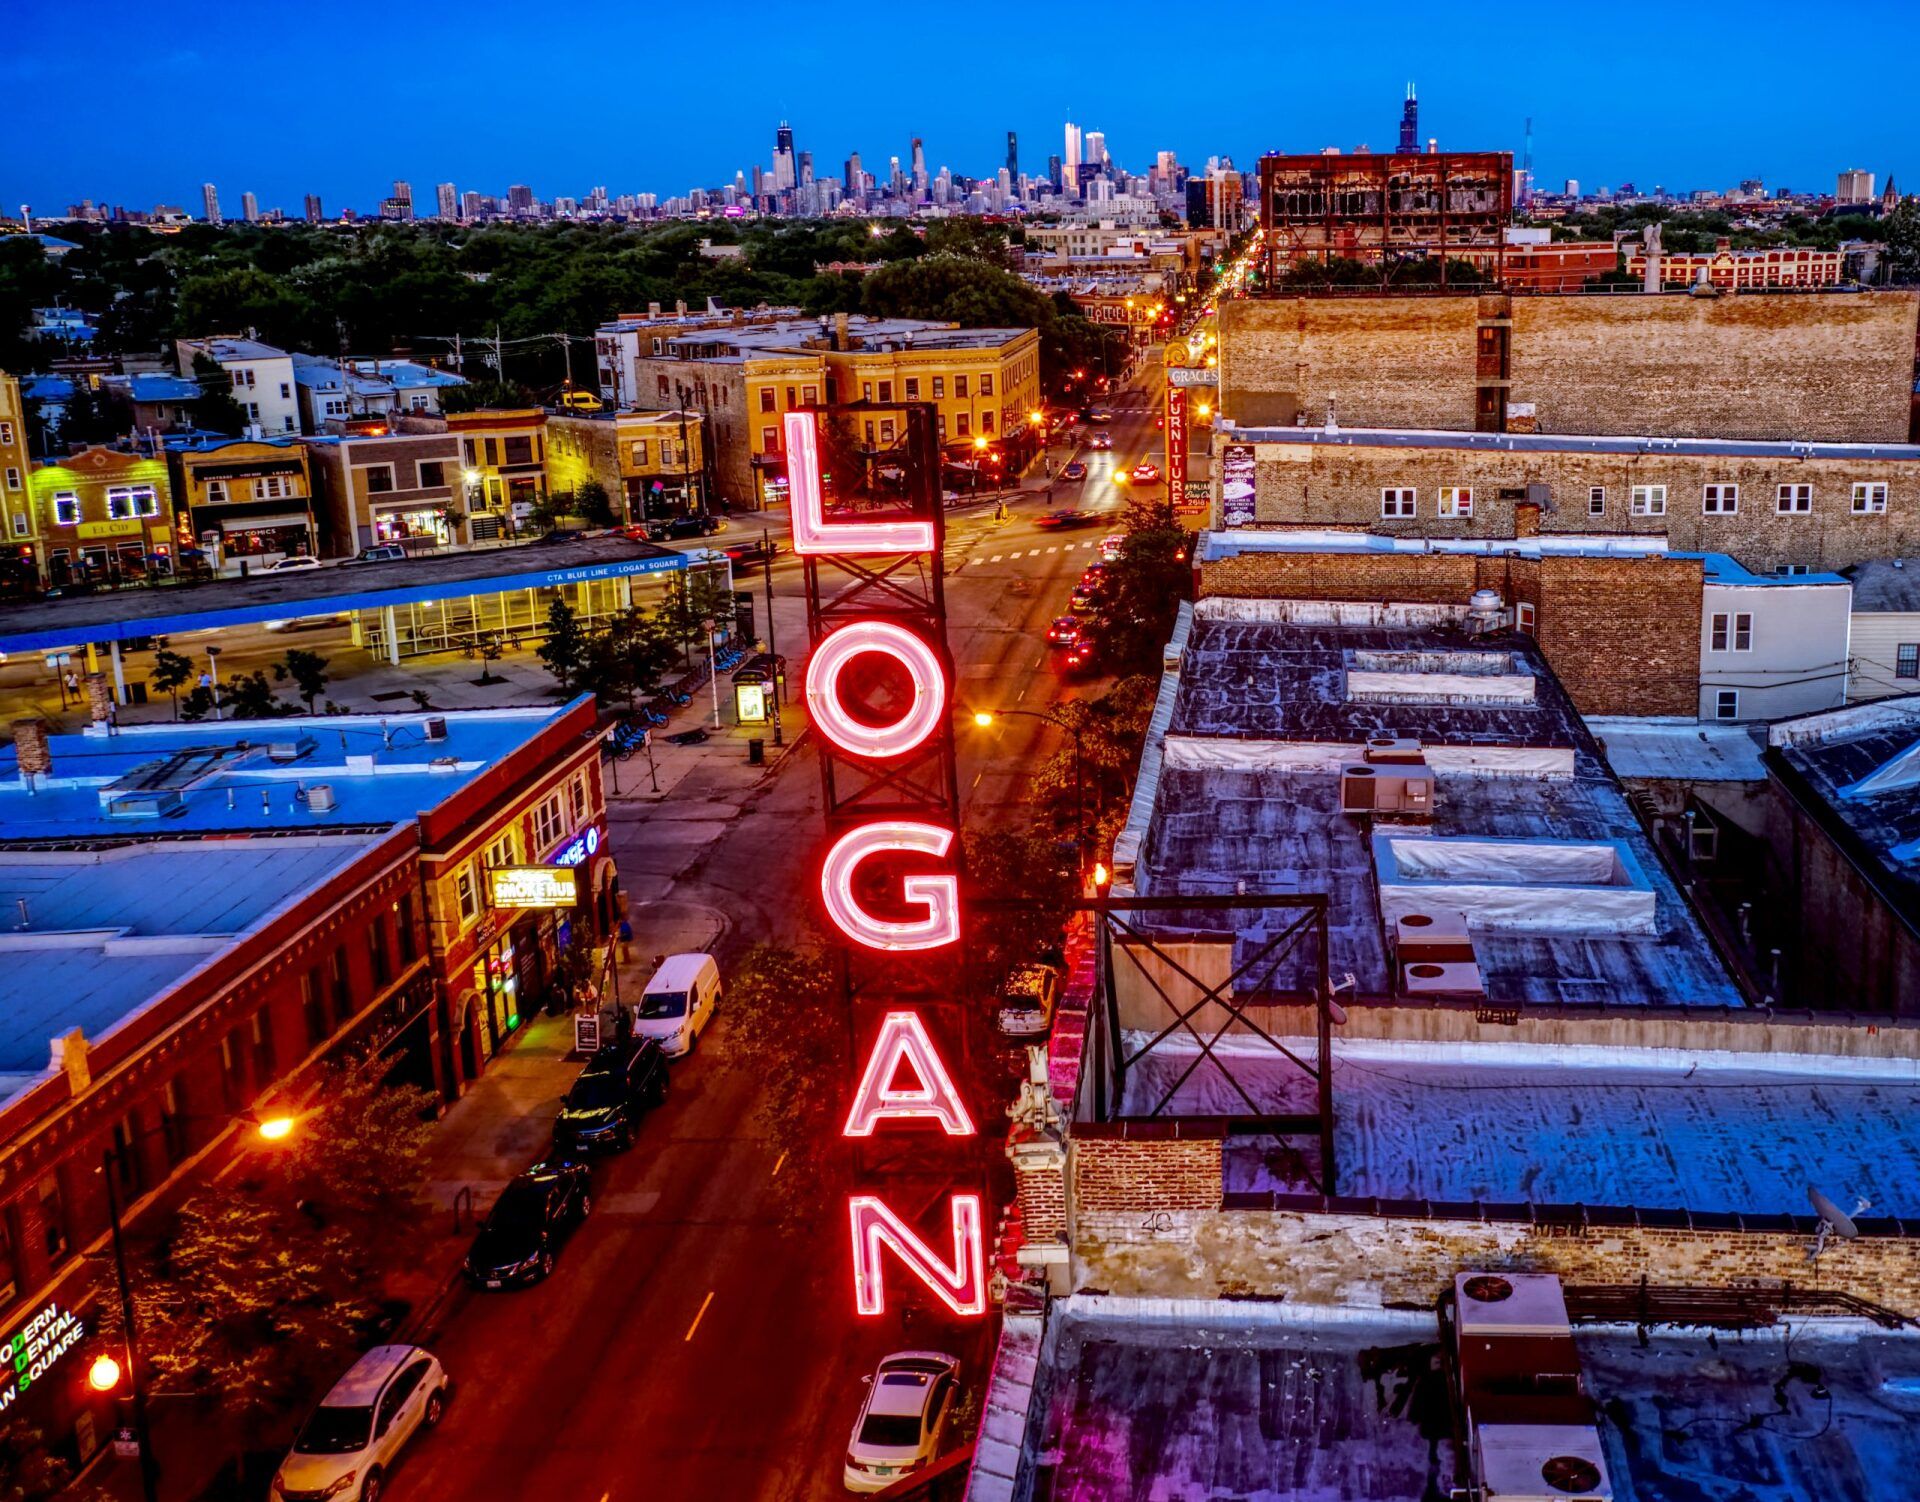 An aerial view of logan street at night